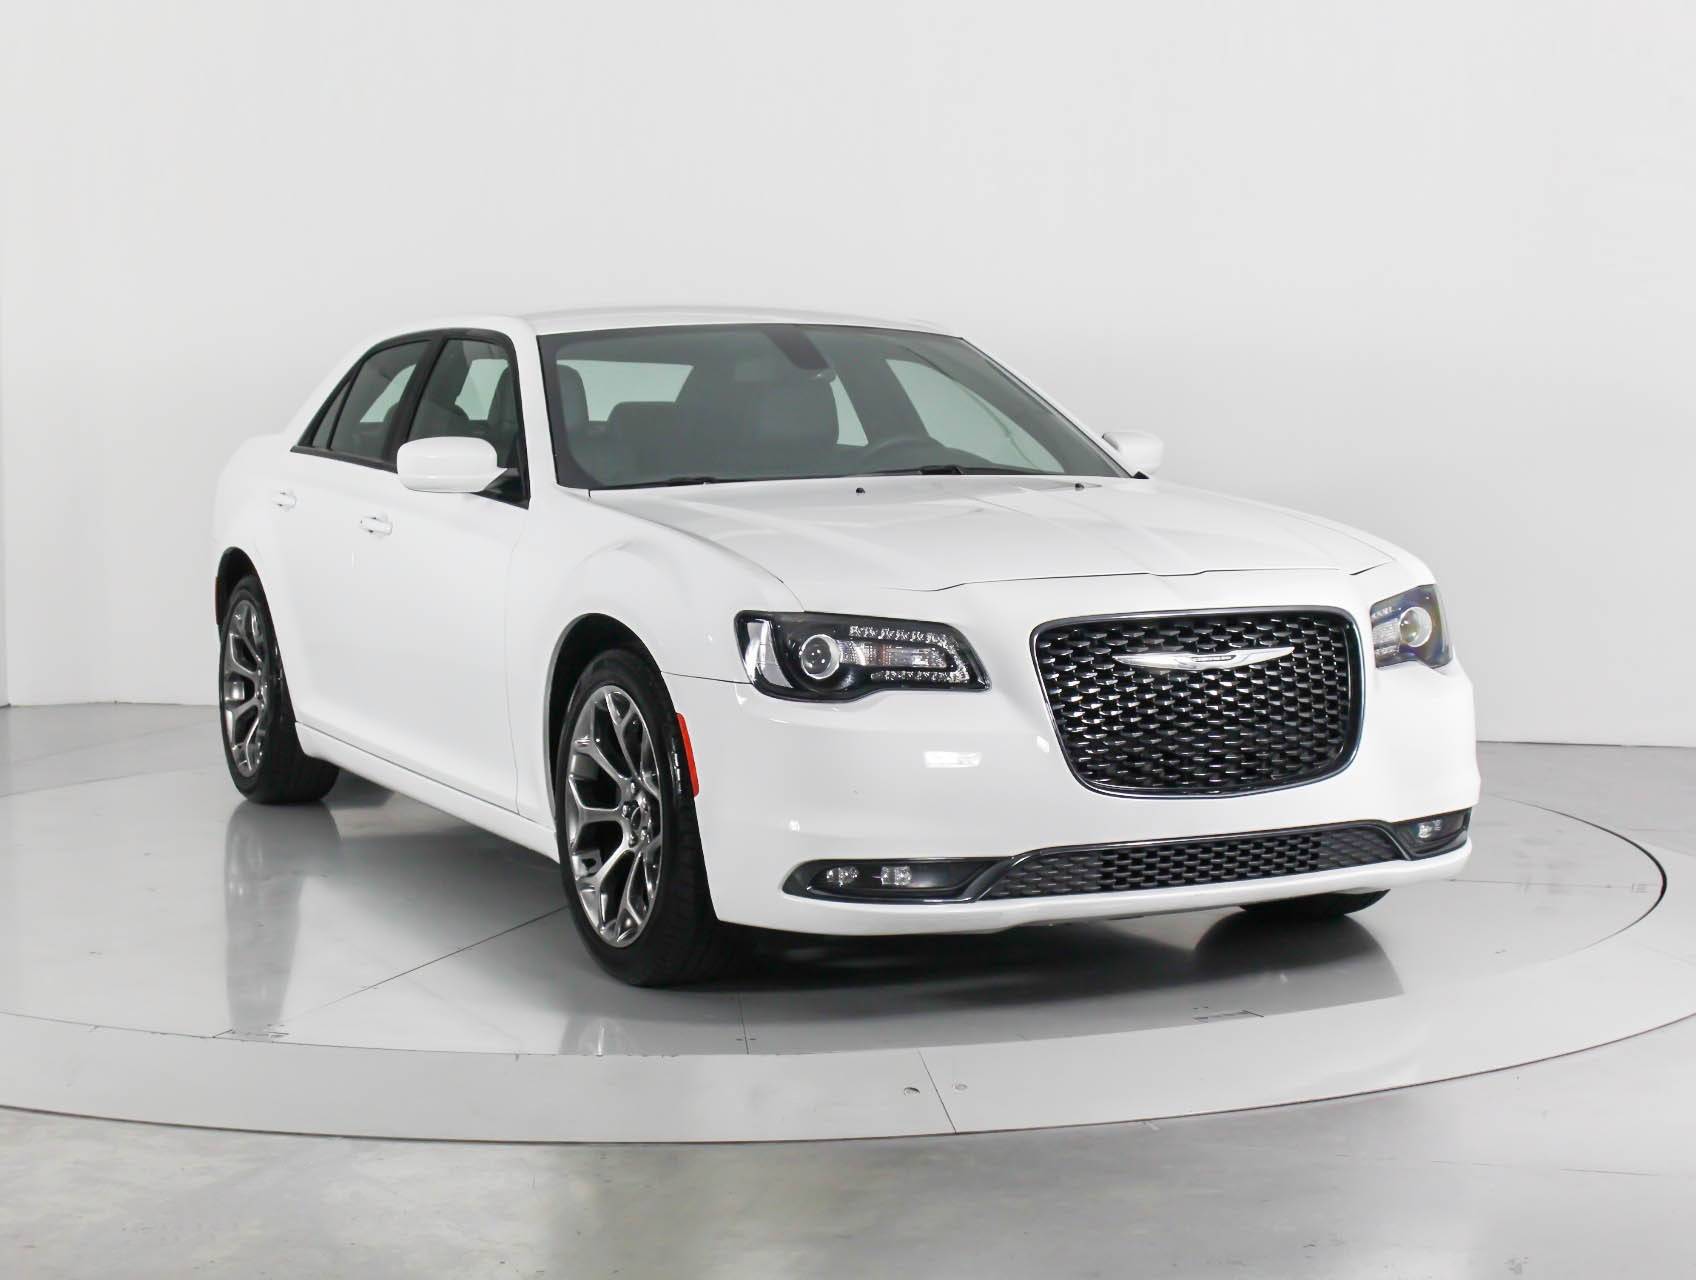 Florida Fine Cars - Used CHRYSLER 300S 2018 WEST PALM S